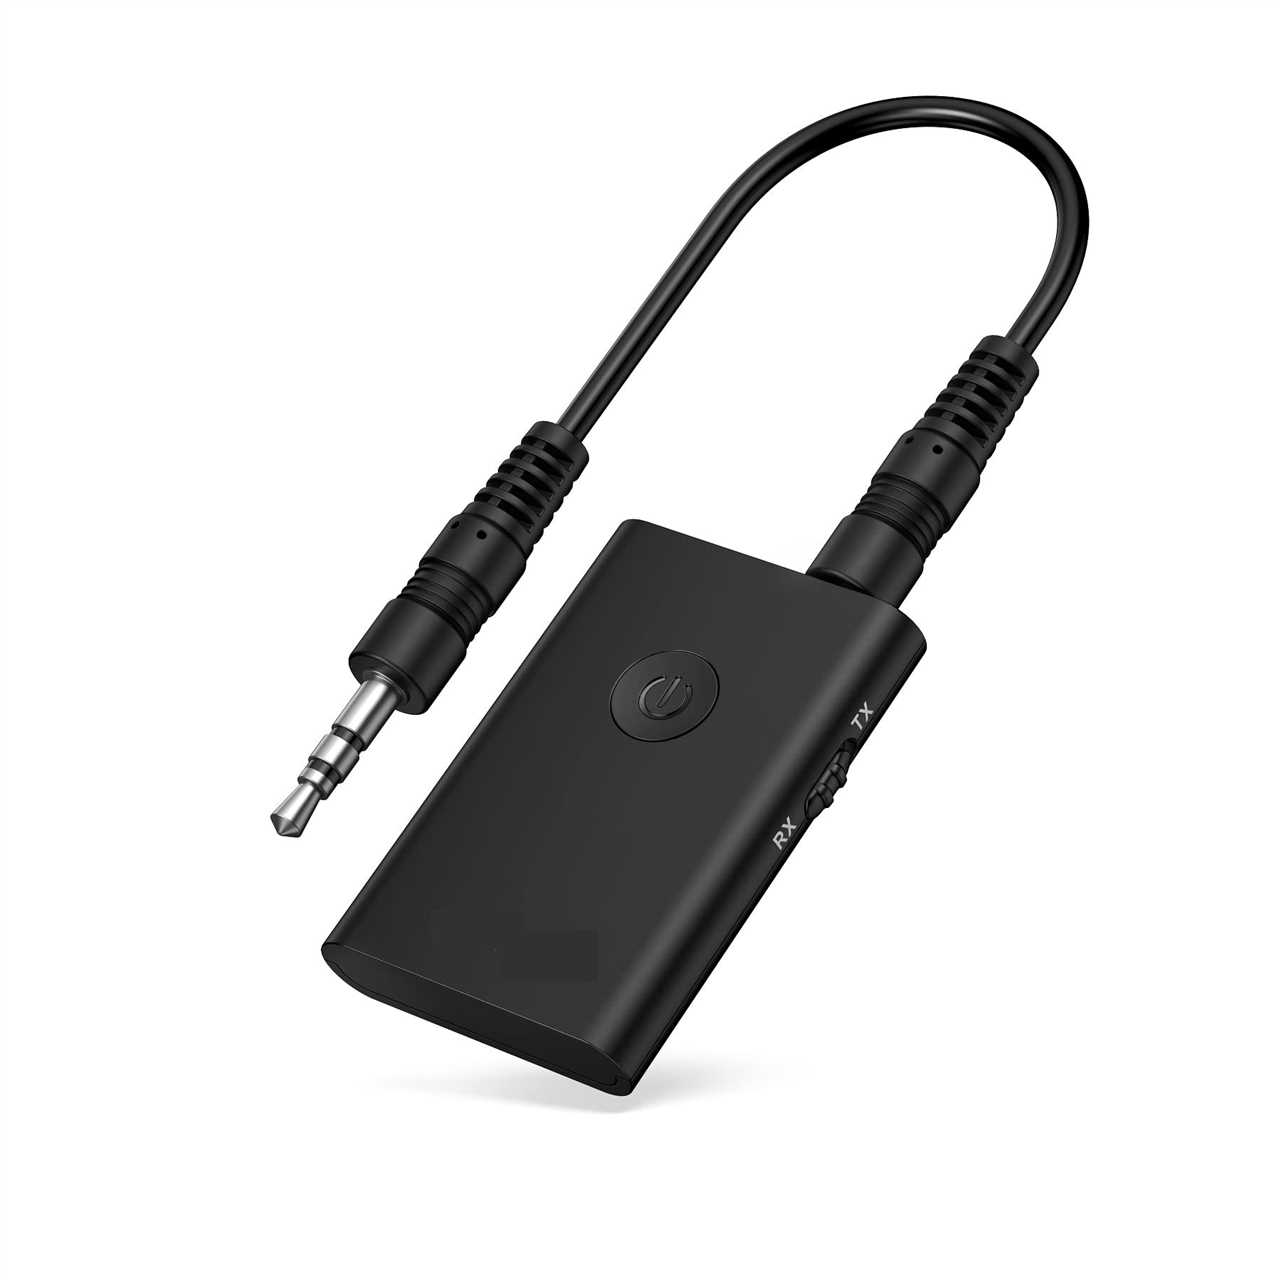 Aux Bluetooth Adapter The Ultimate Guide for Wireless Audio Streaming